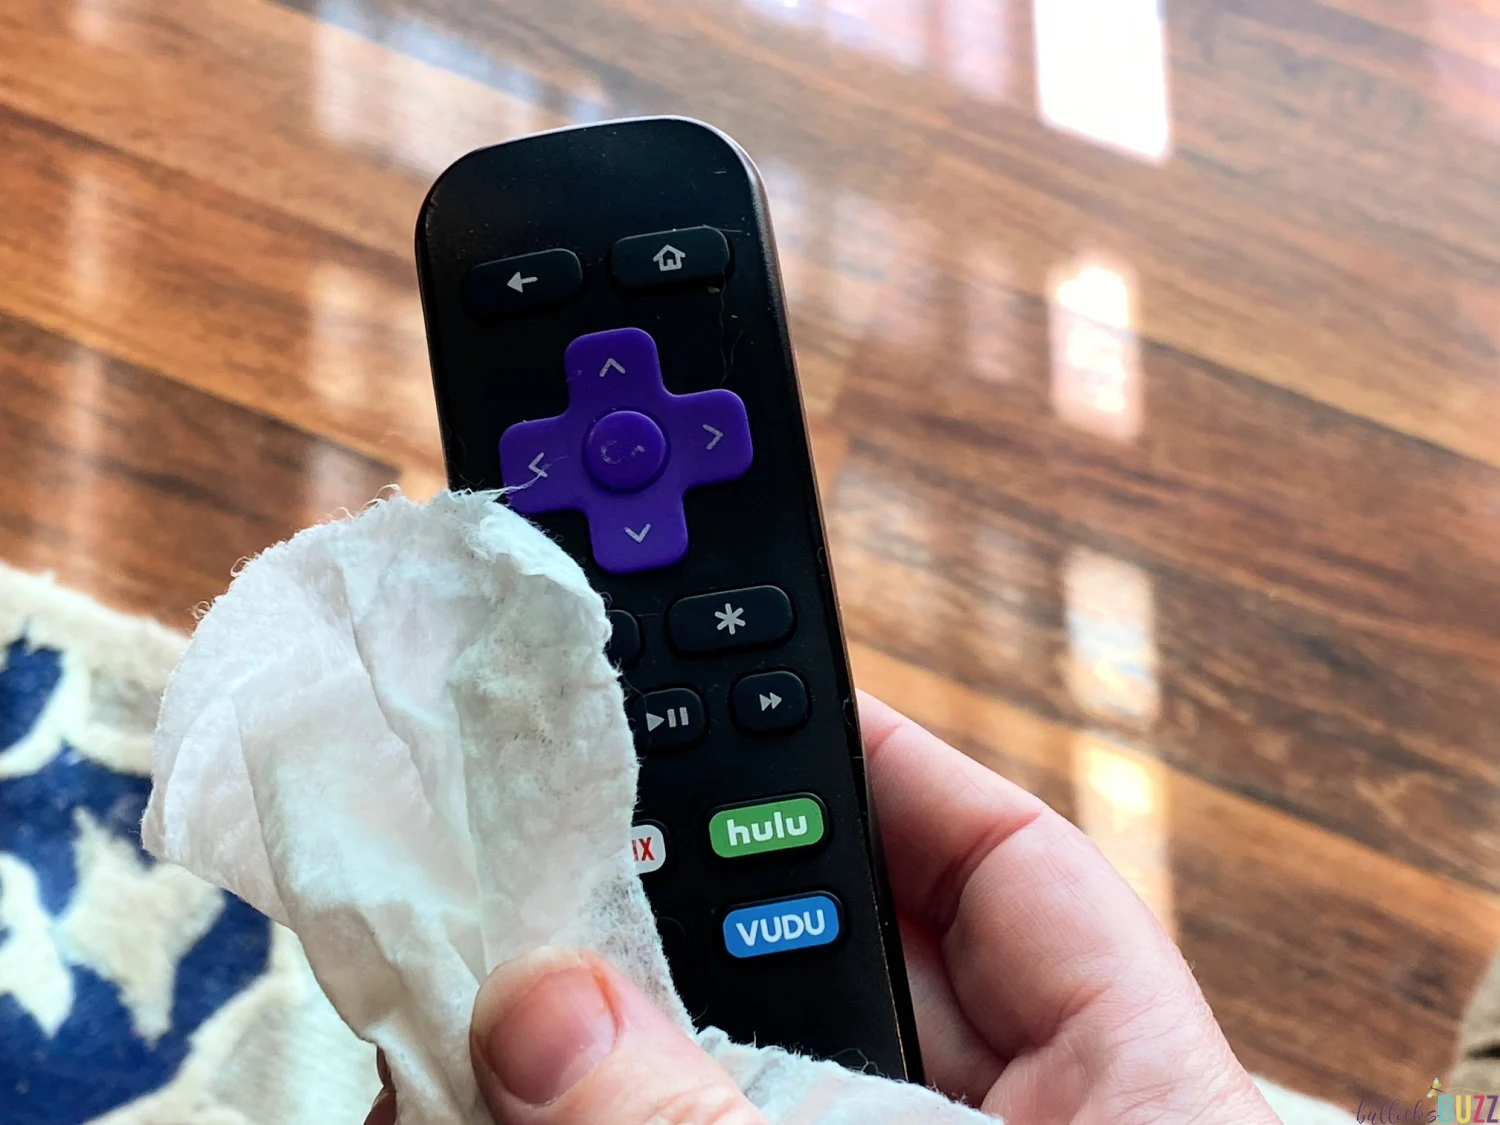 disinfecting wipes are safe to use on electronics like this remote